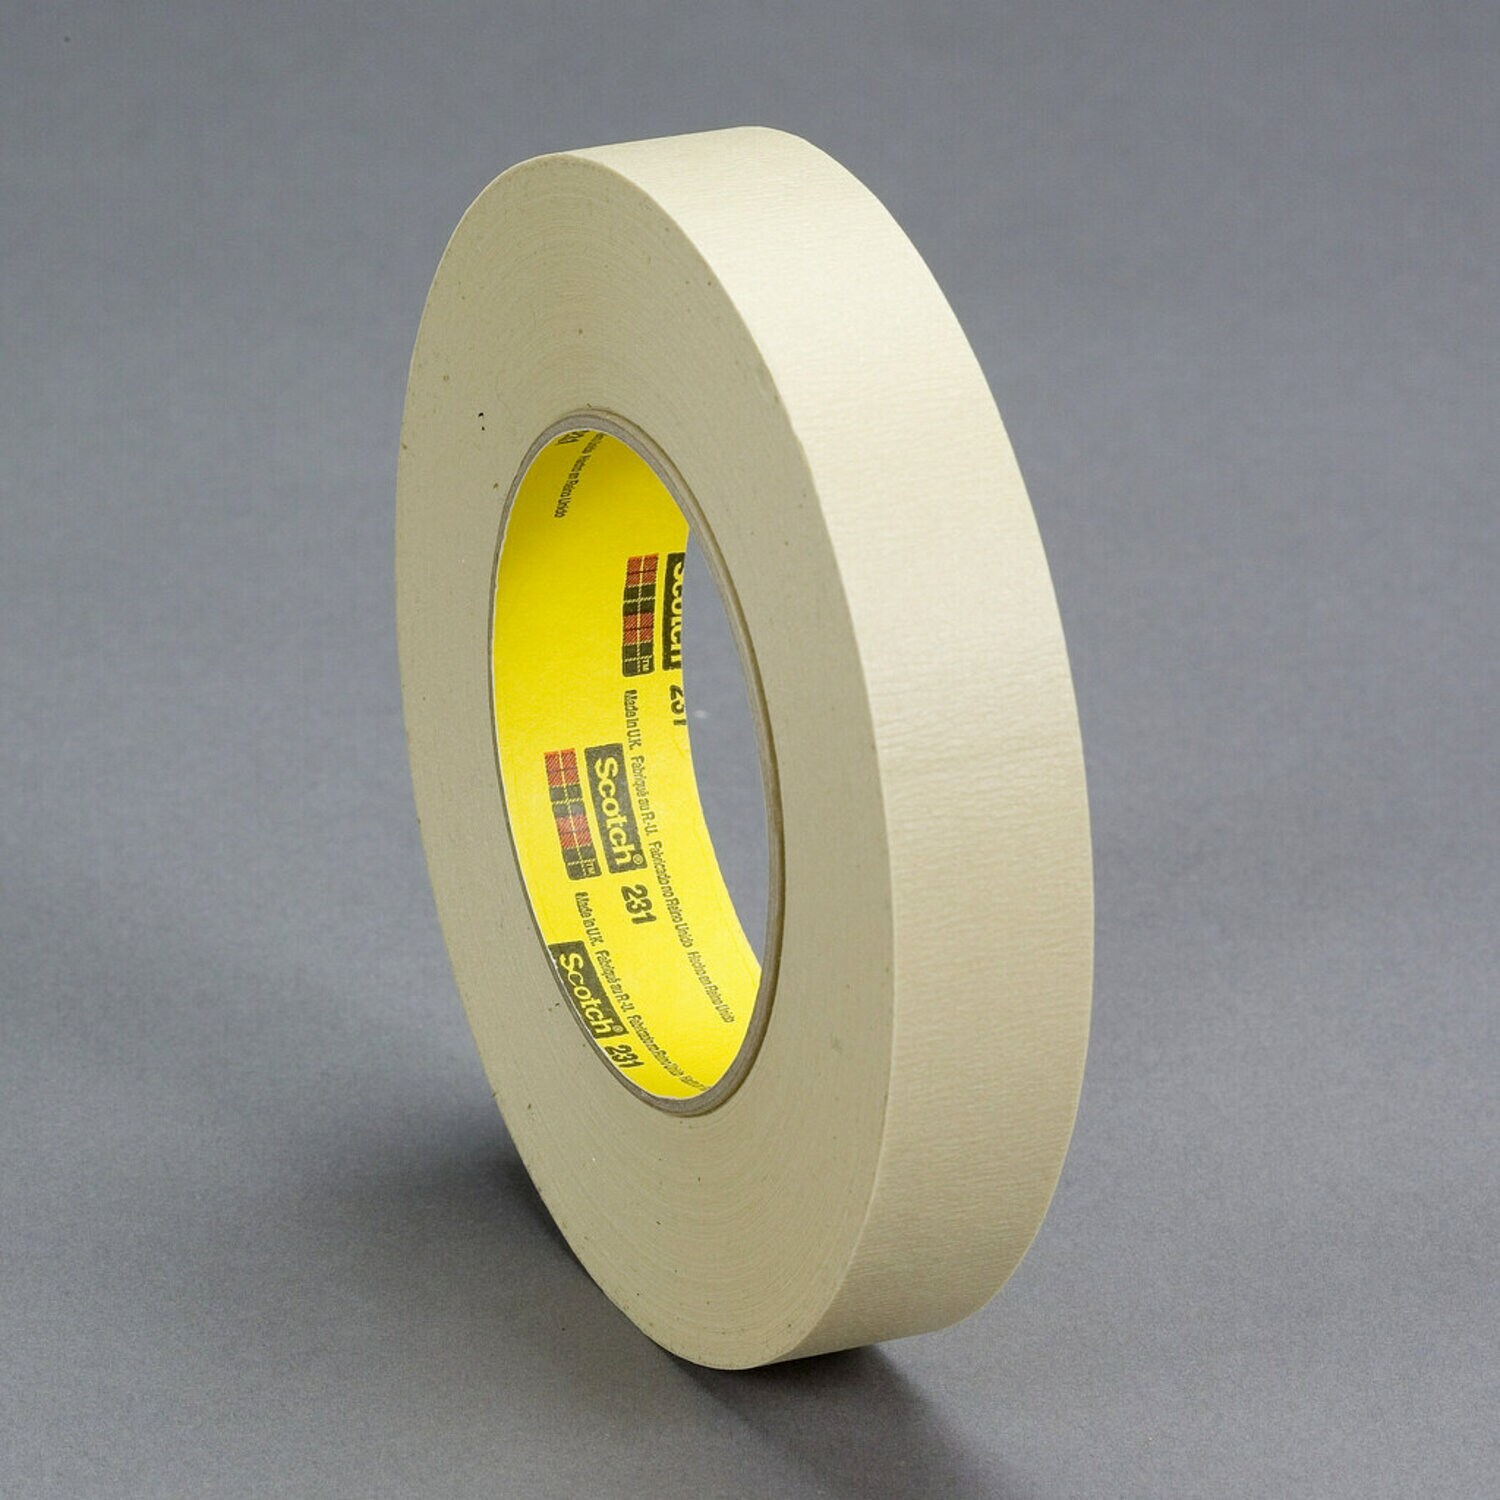 10 Pack 1 inch x 60yd STIKK Yellow Painters Tape 14 Easy Removal Trim Edge